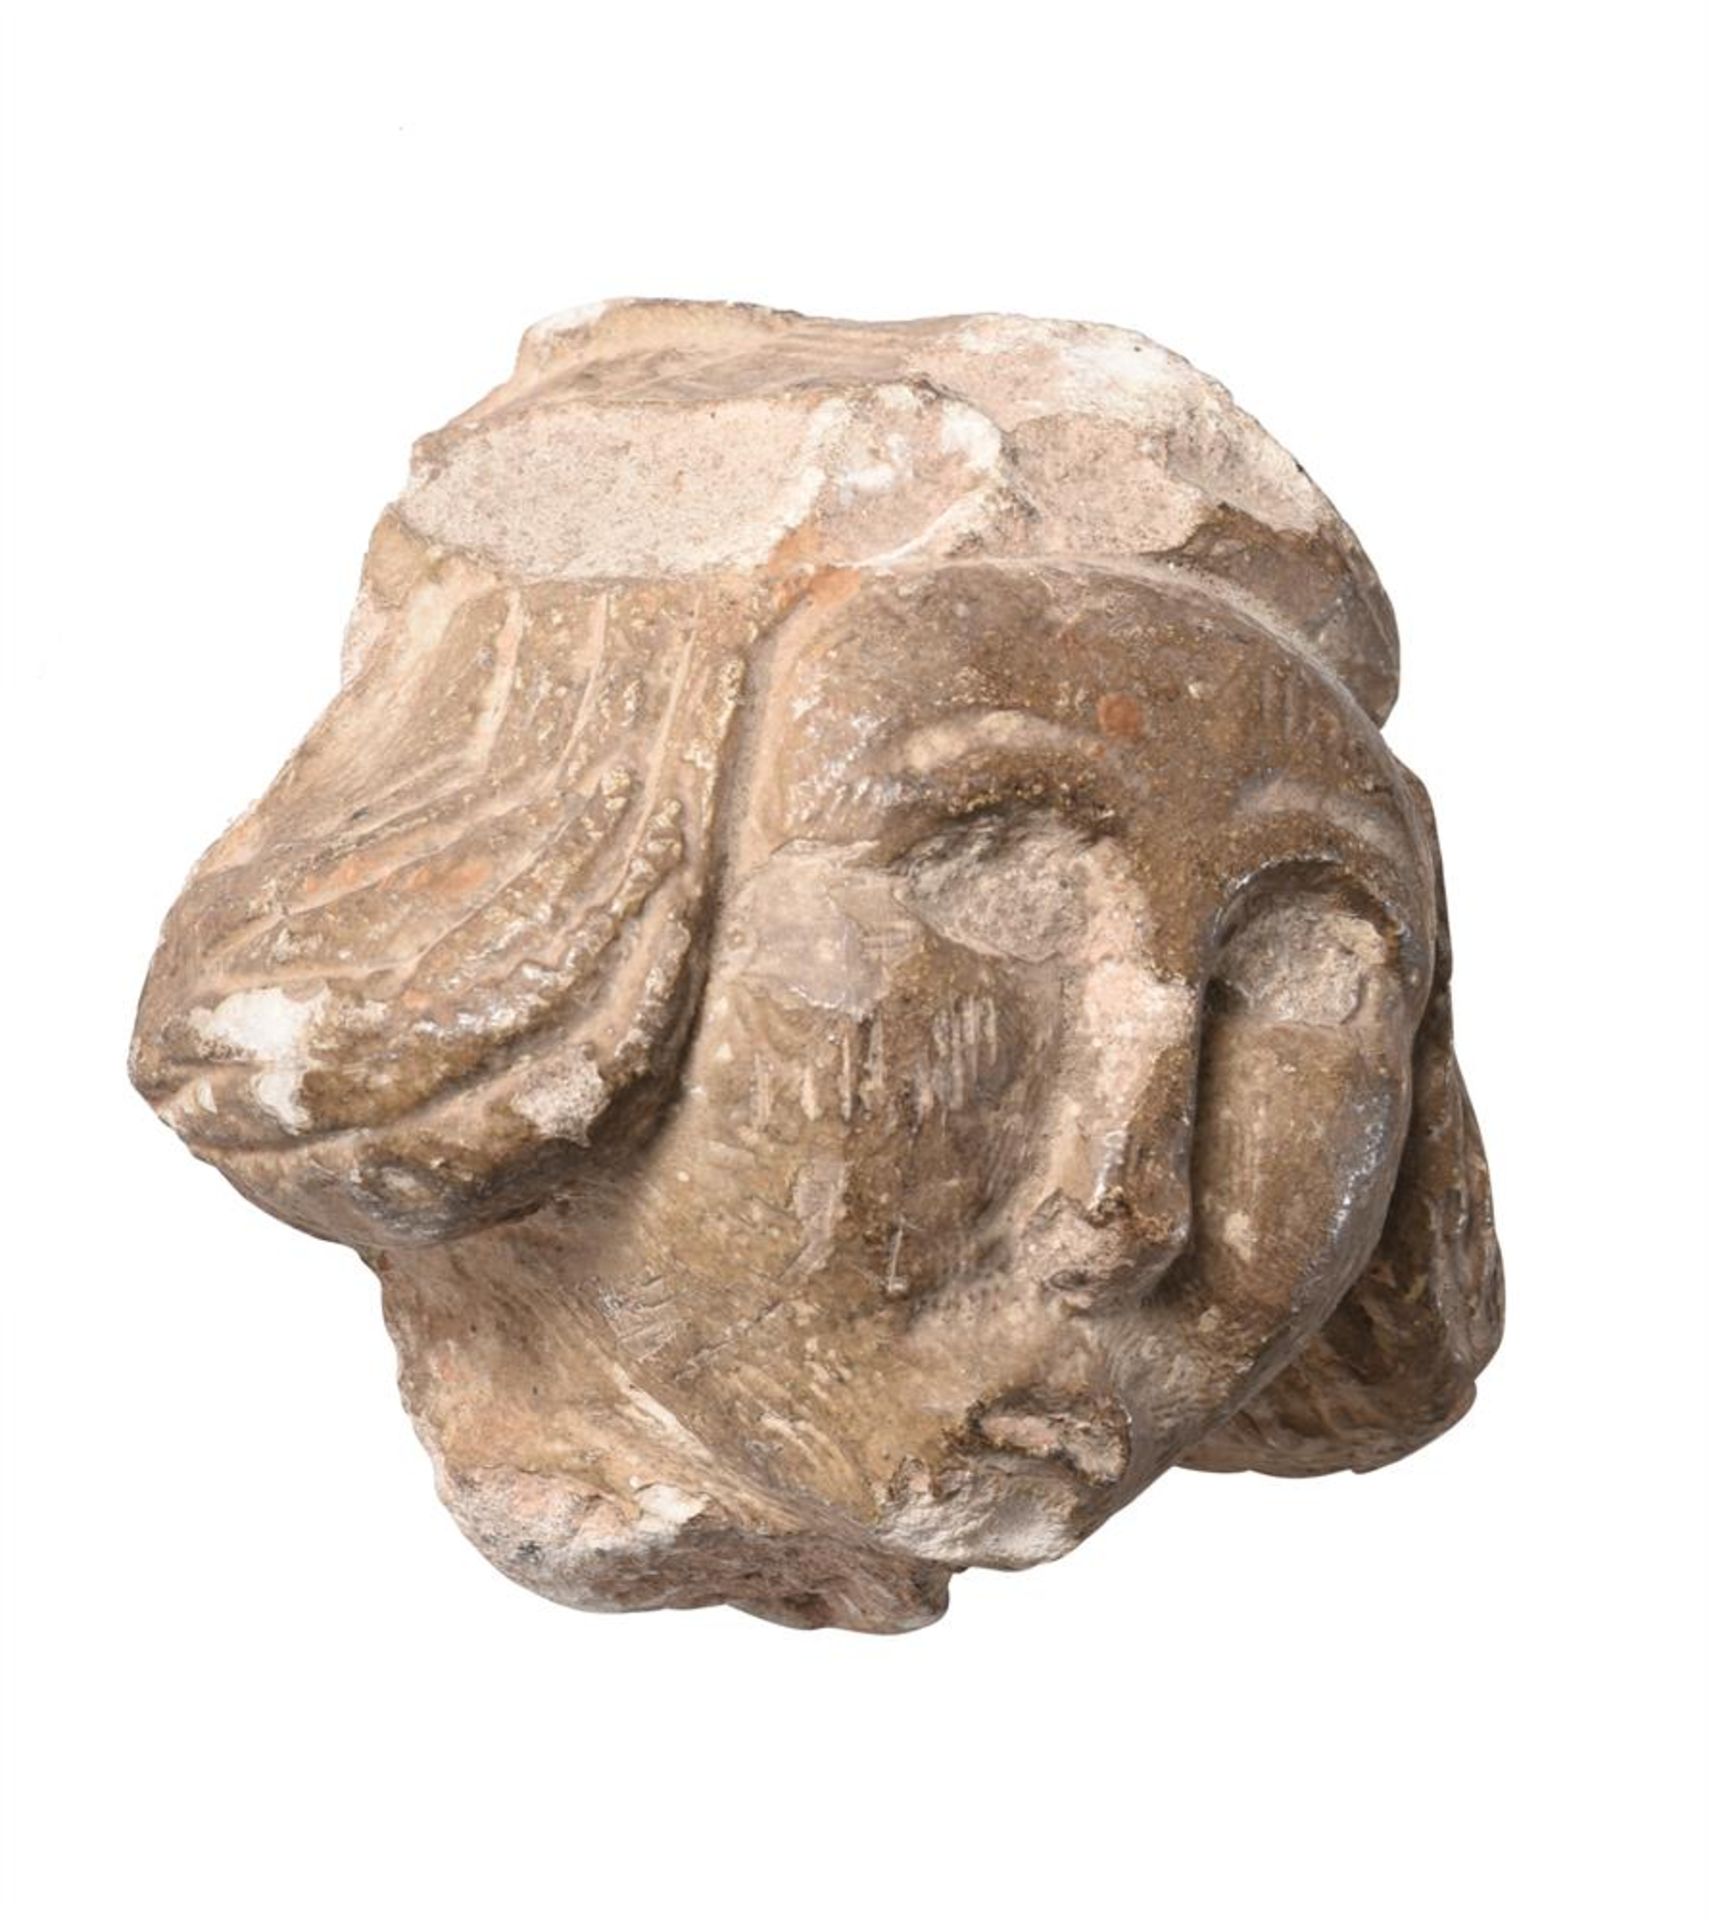 TWO FRAGMENTARY CARVED STONE HEADS, PROBABLY 11TH-13TH CENTURIES - Image 3 of 5